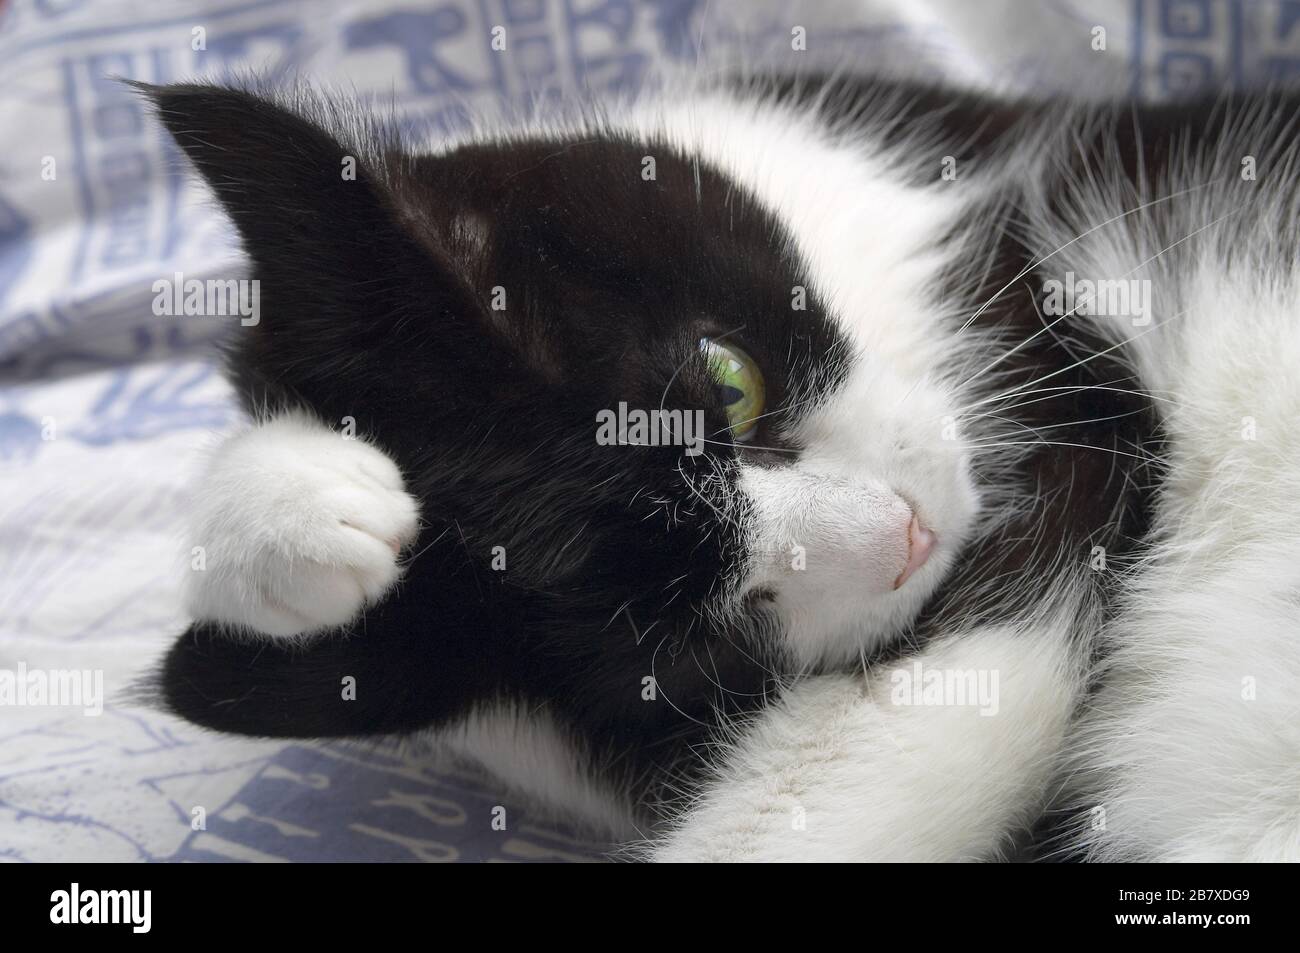 Adult female black and white cat (Felis catus) grooming with one paw over her ear Stock Photo